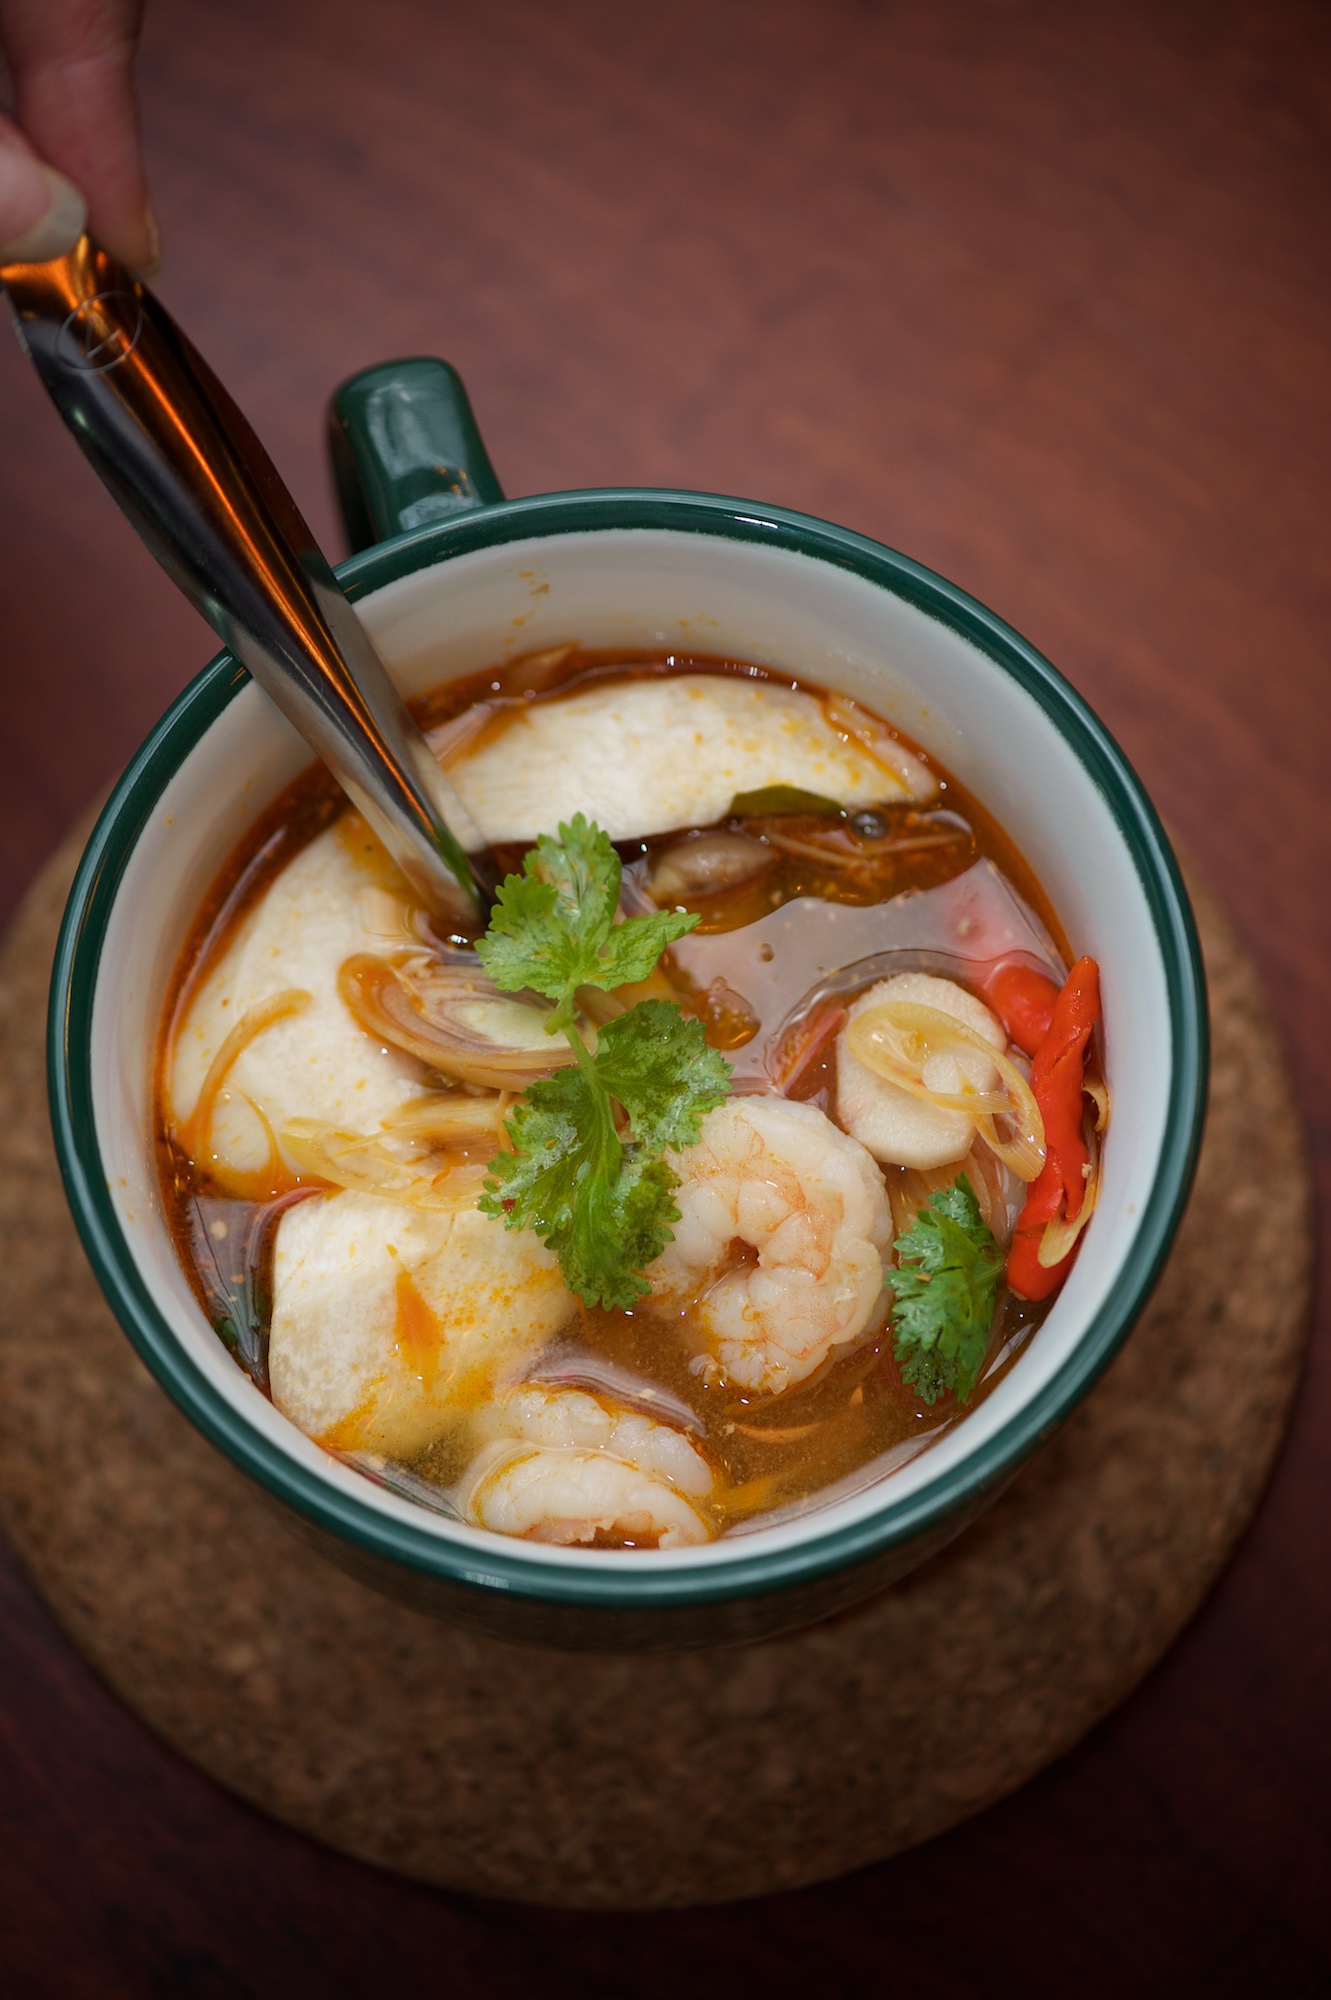 Spicy and sour prawn soup with orinji mushroom